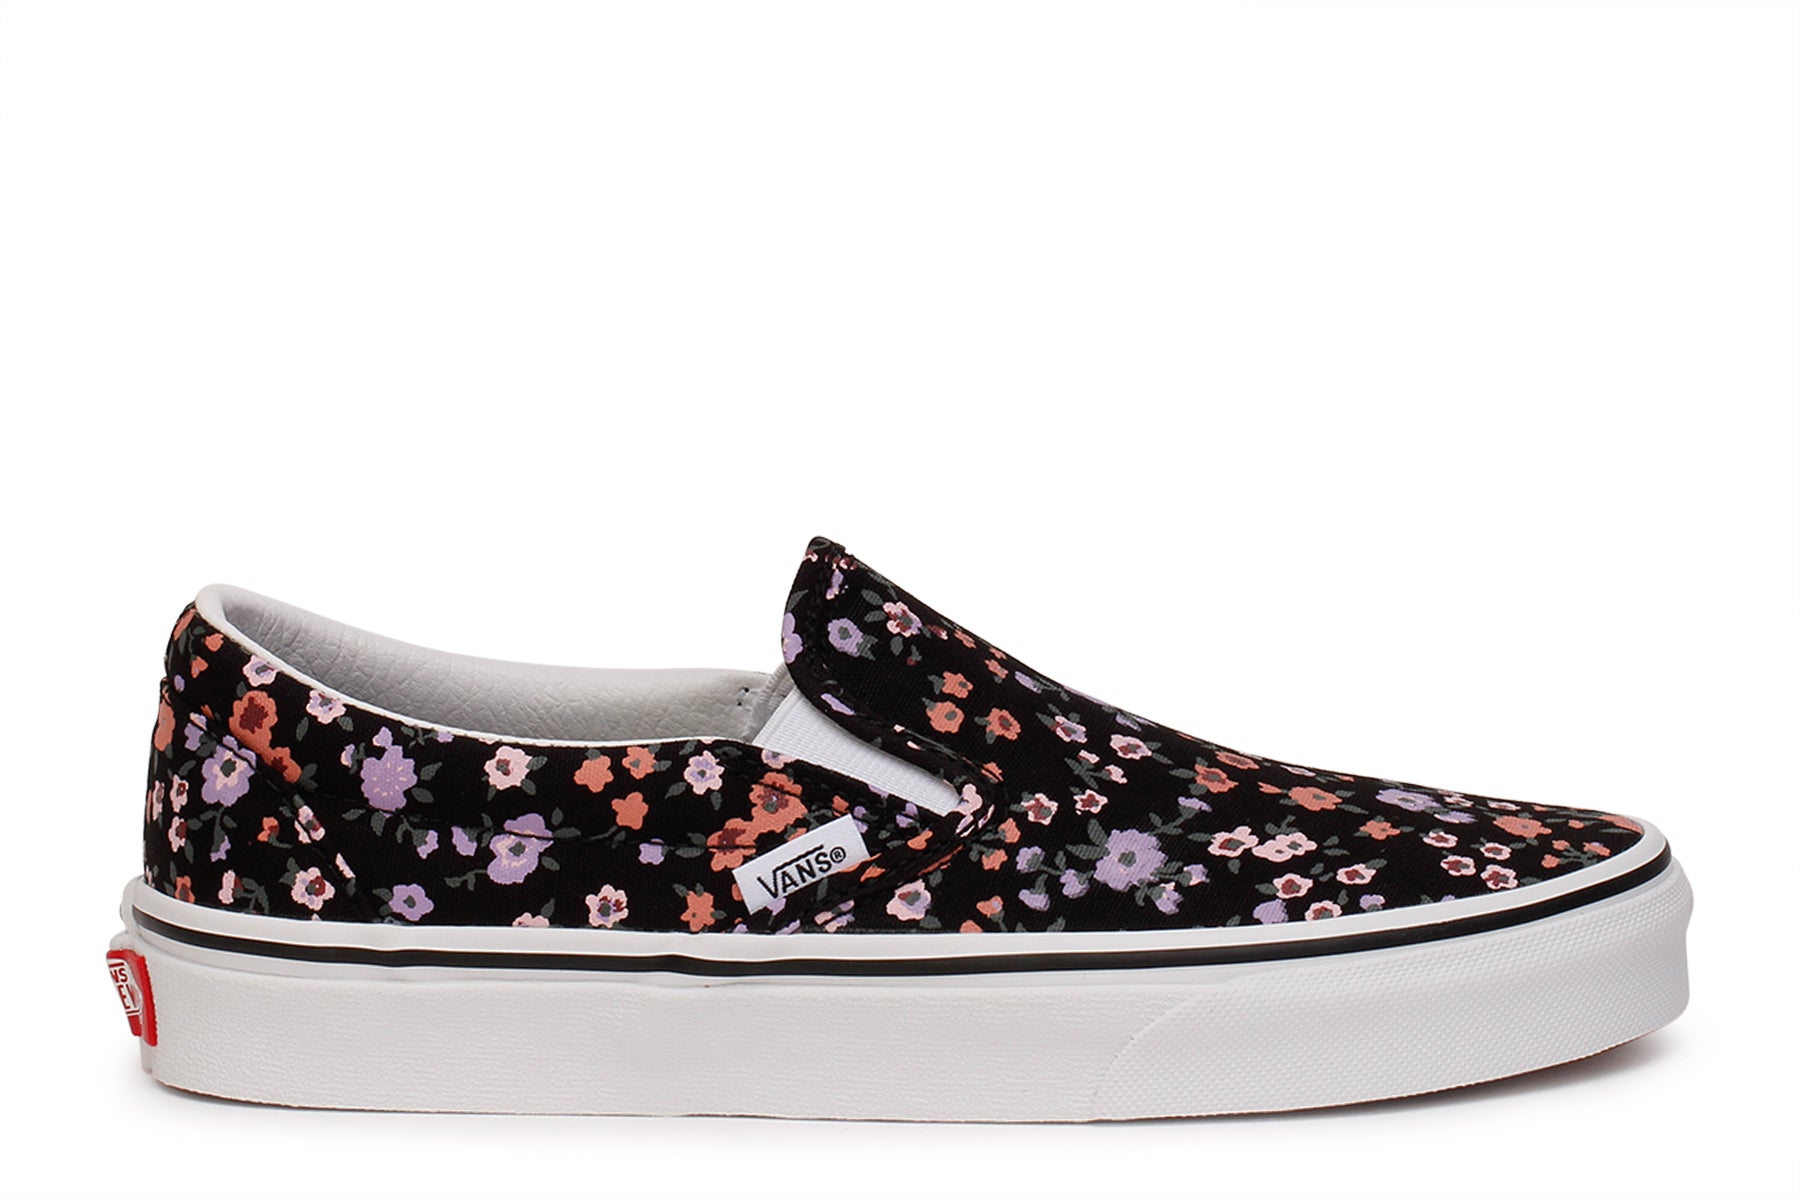 Classic Slip-On Floral